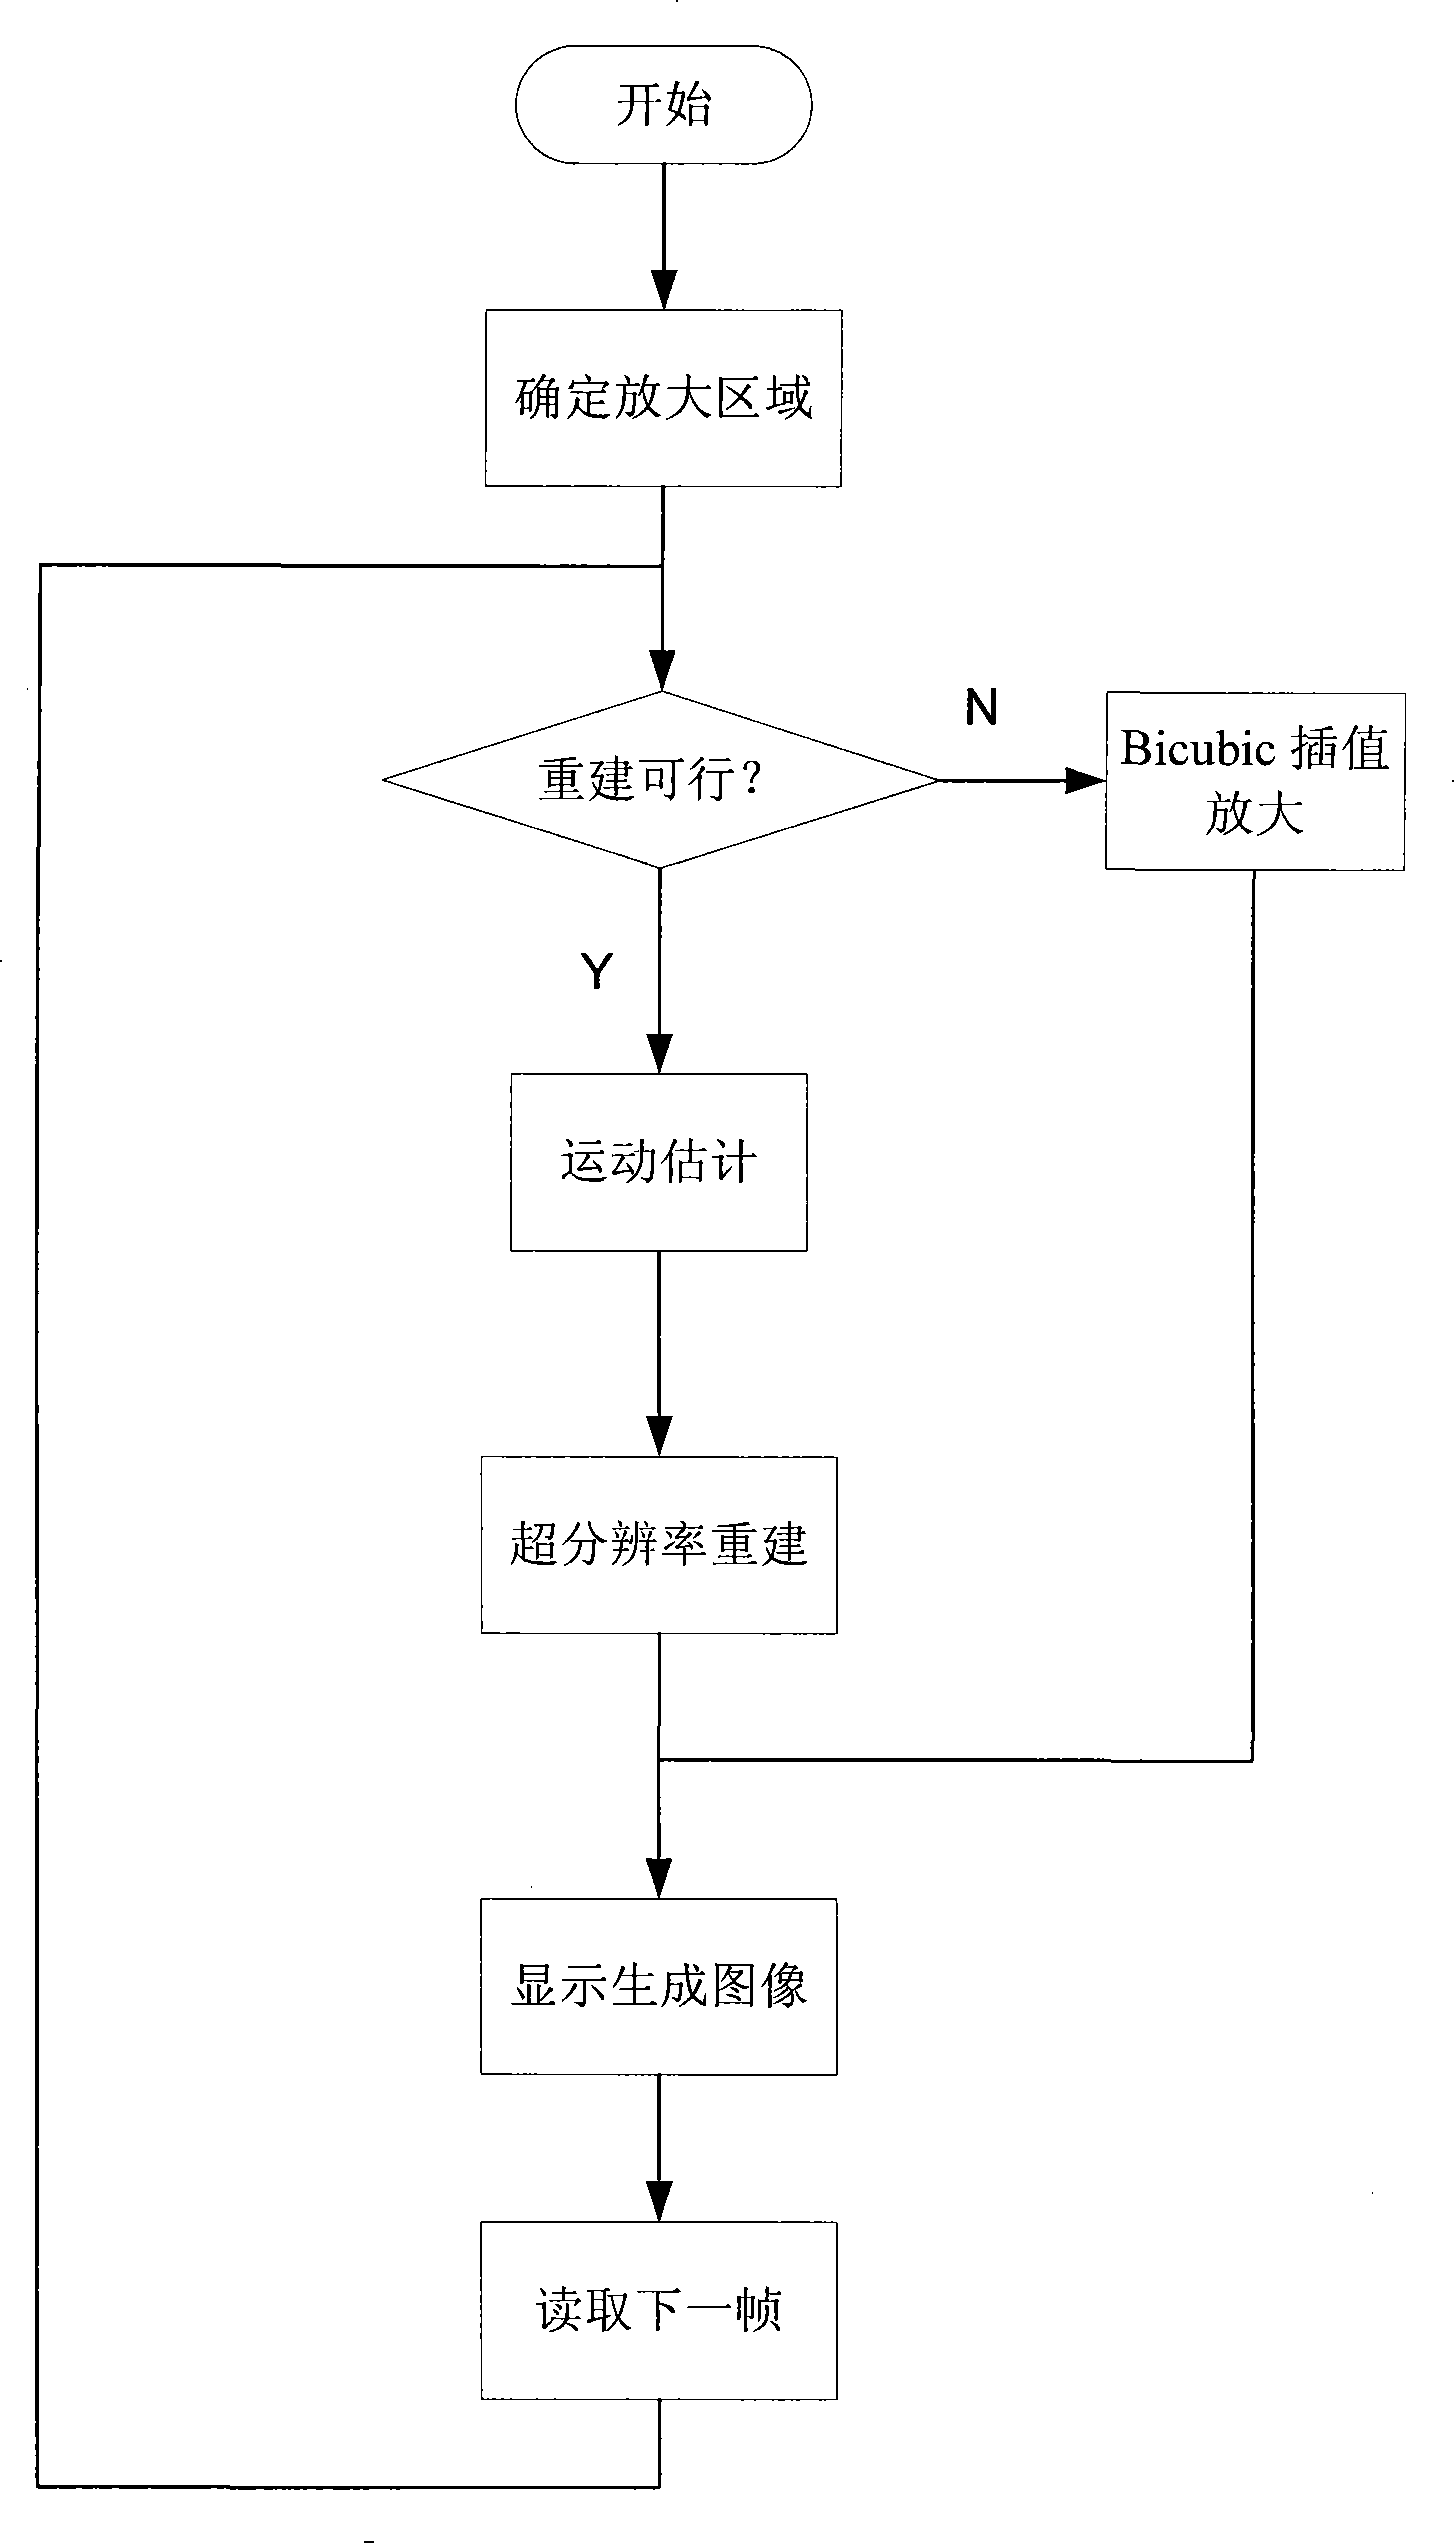 Method for detail real-time replay of digital television